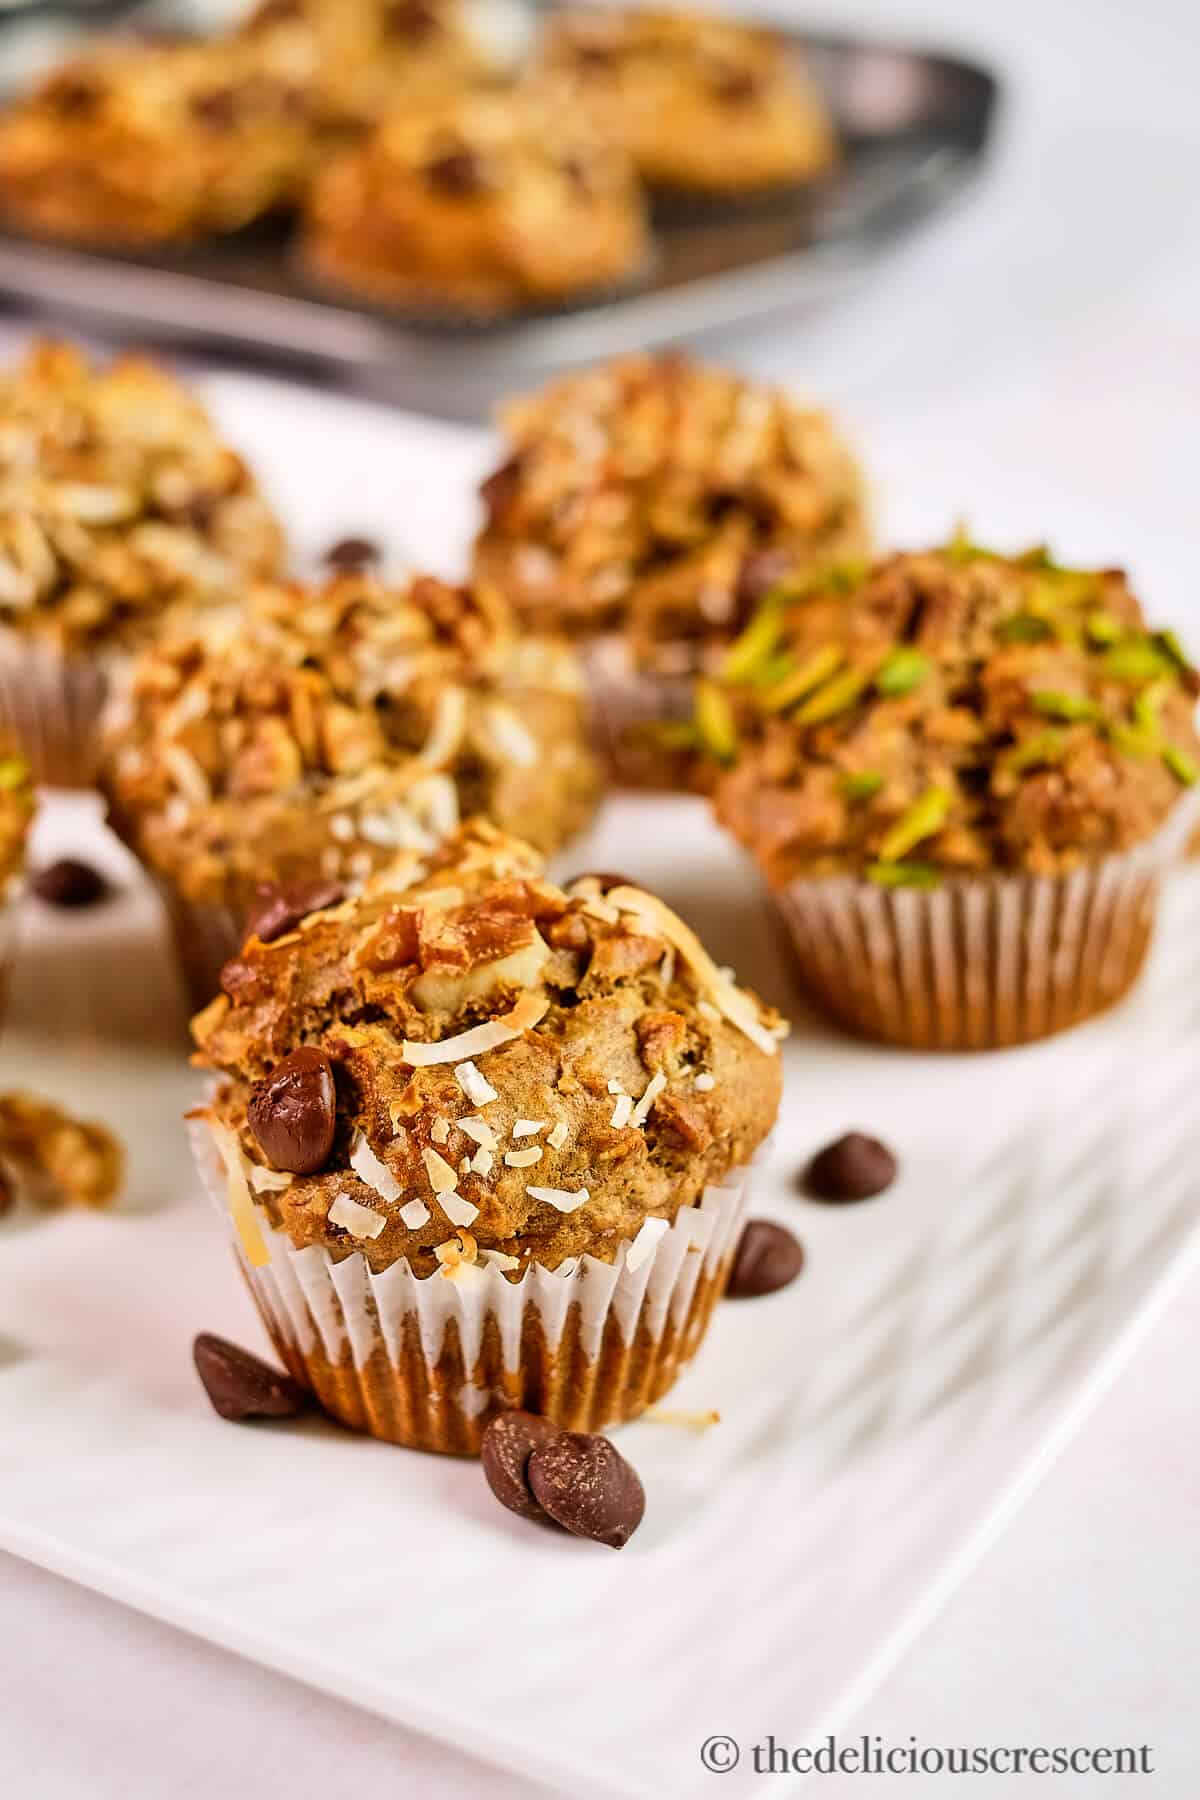 Baked healthy banana muffins on a plate.